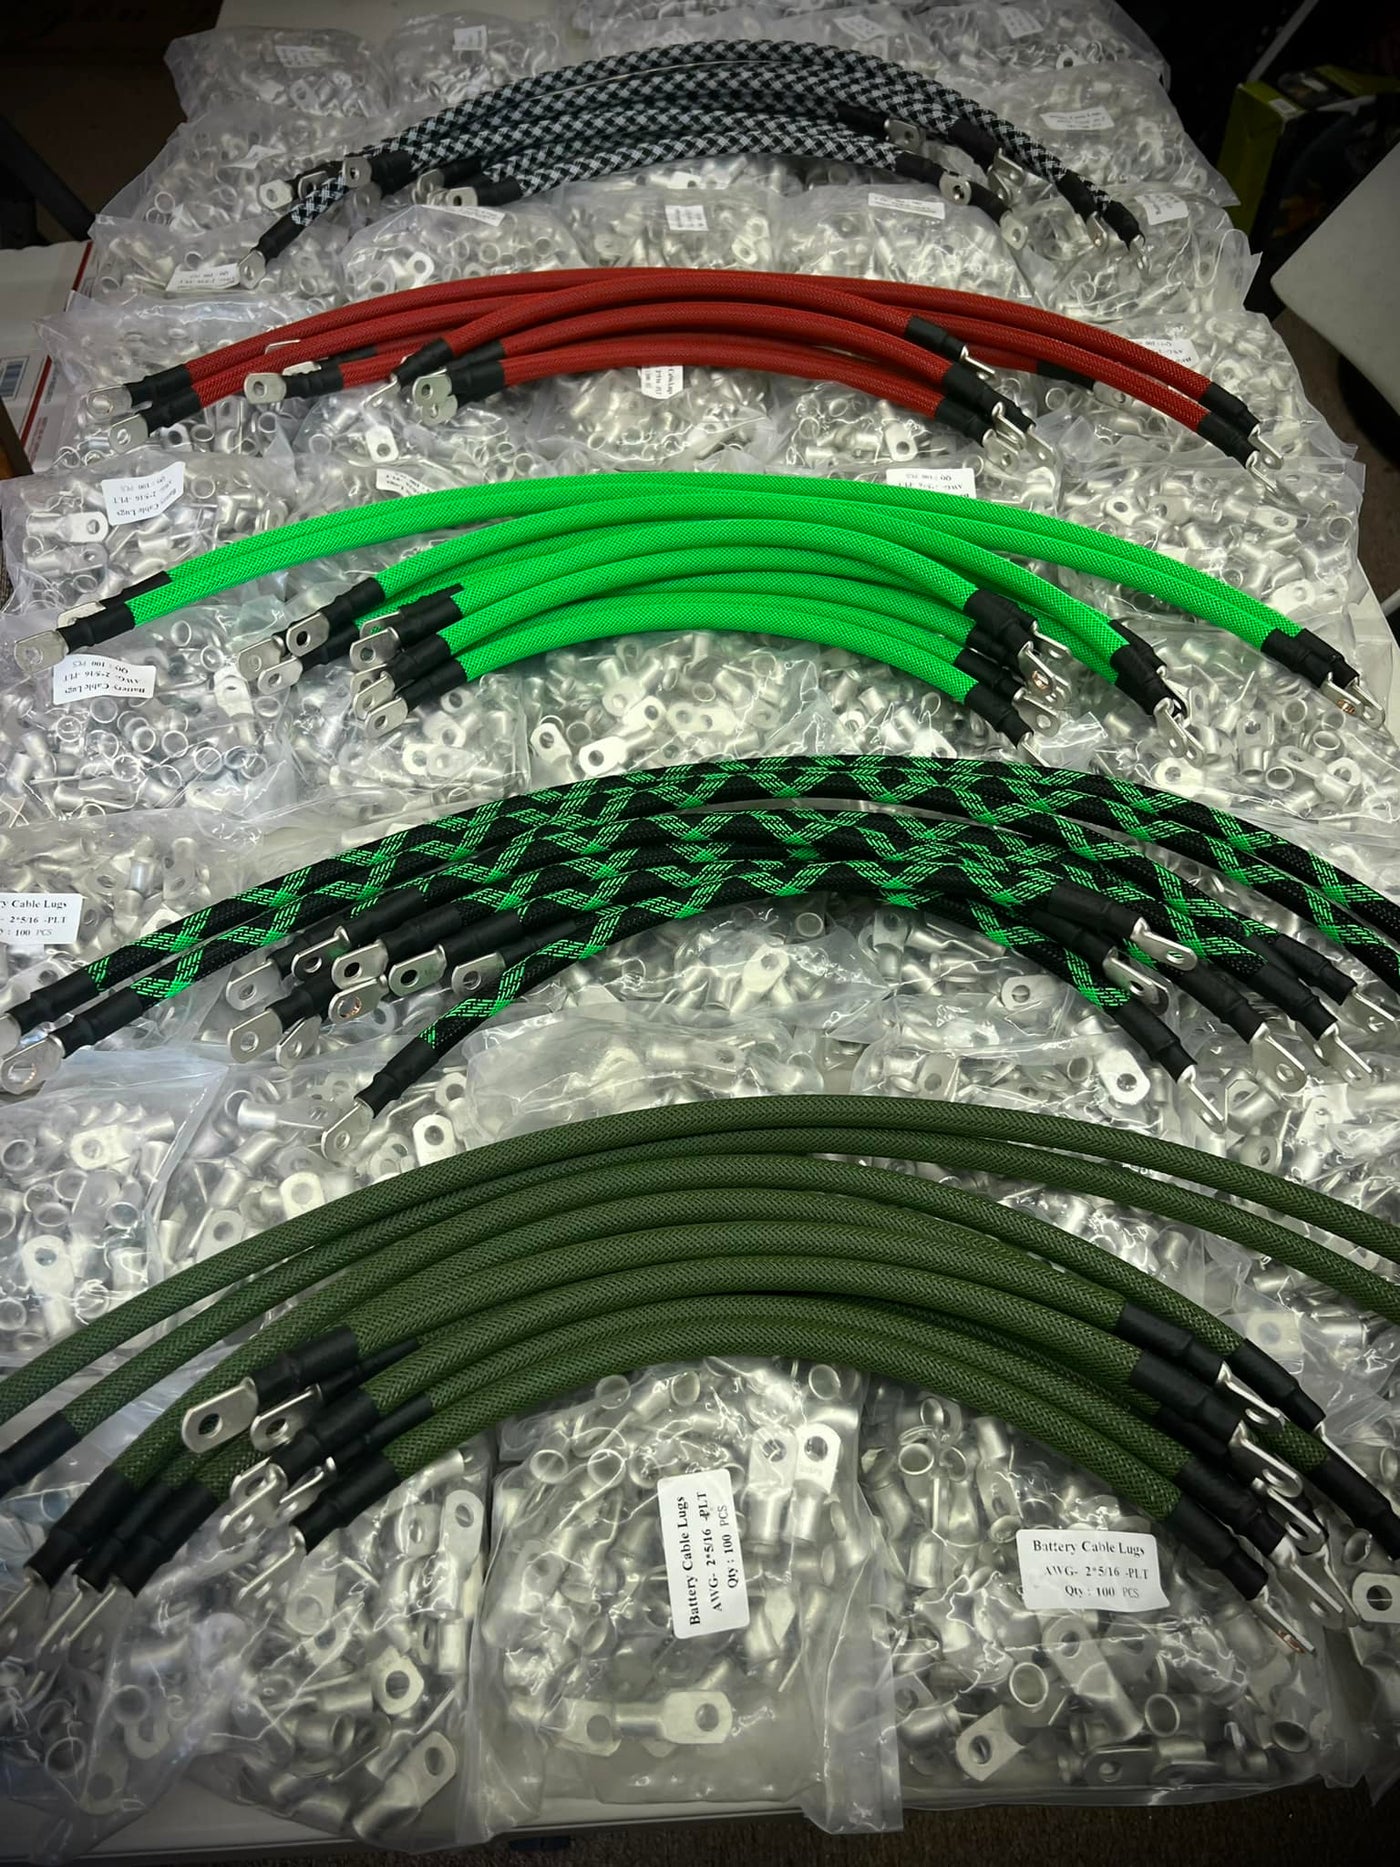 Yamaha 2 AWG Gauge complete cable wire kits